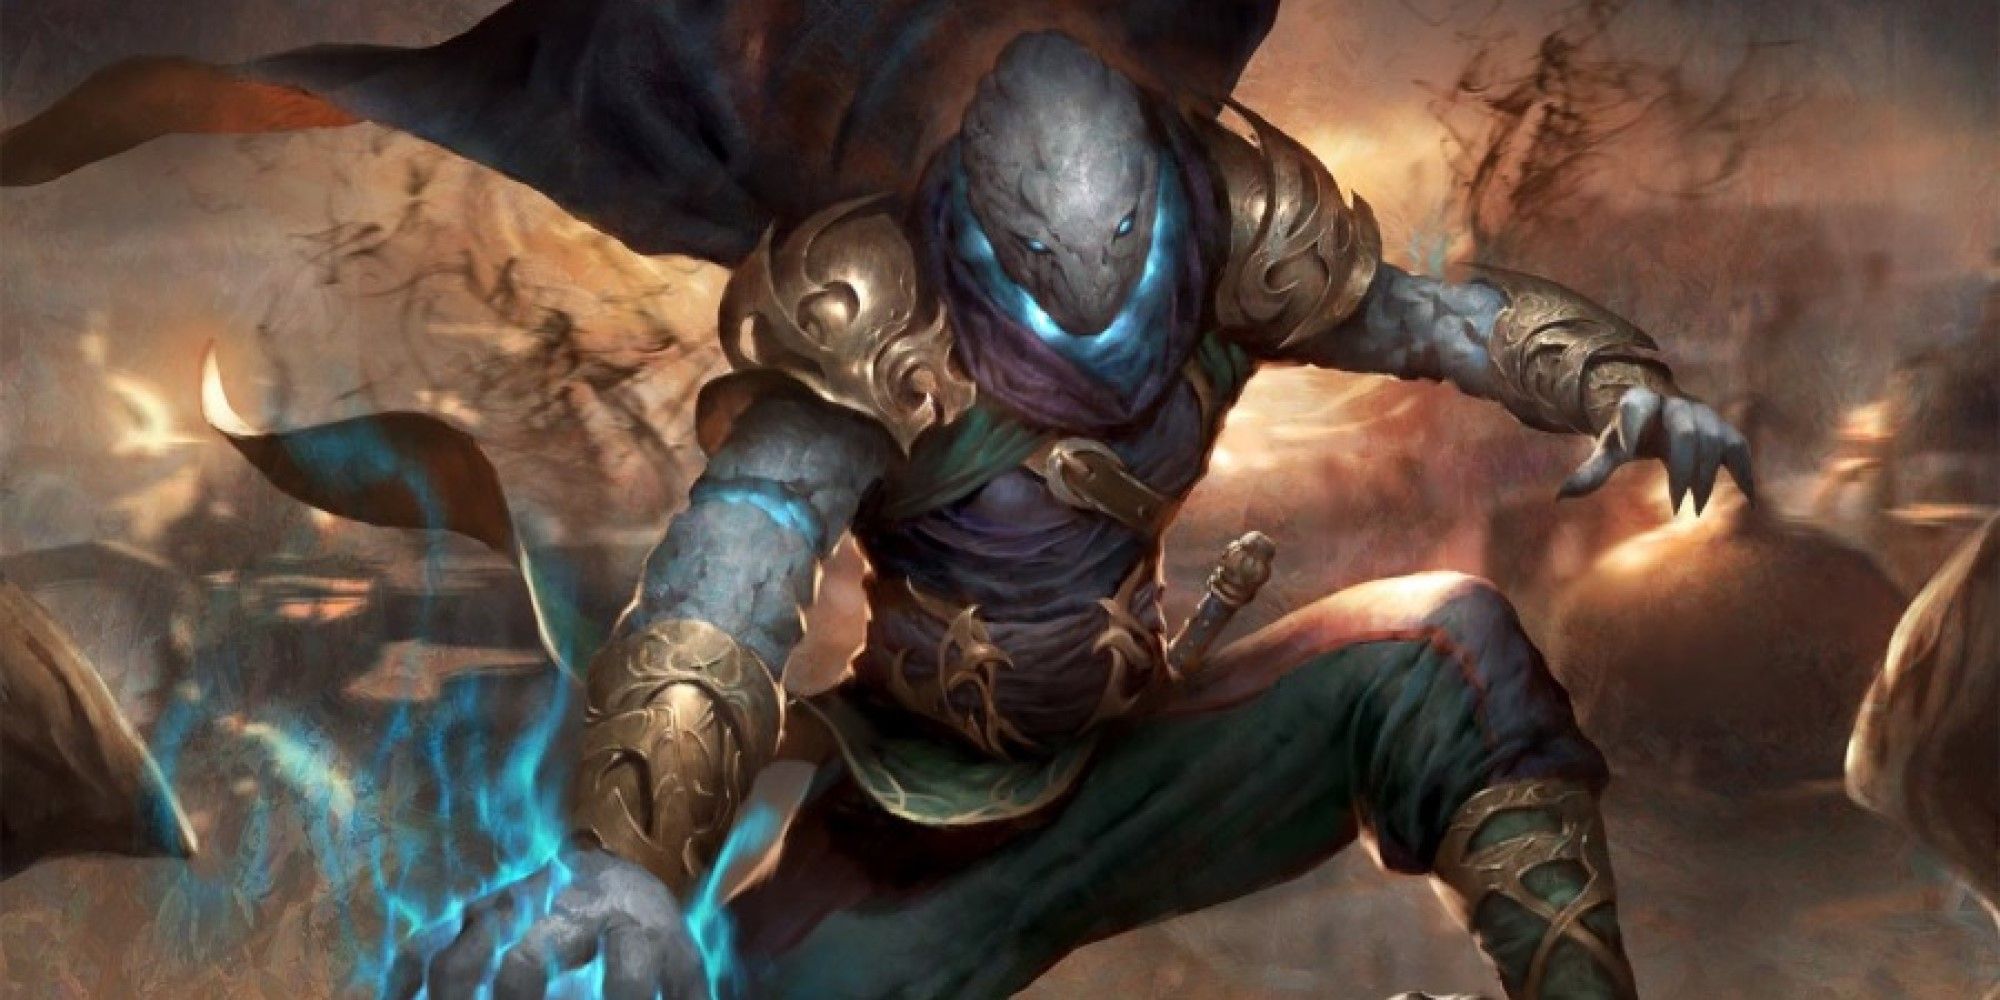 MTG Aetherborn warrior that drains the vitality of fallen enemies